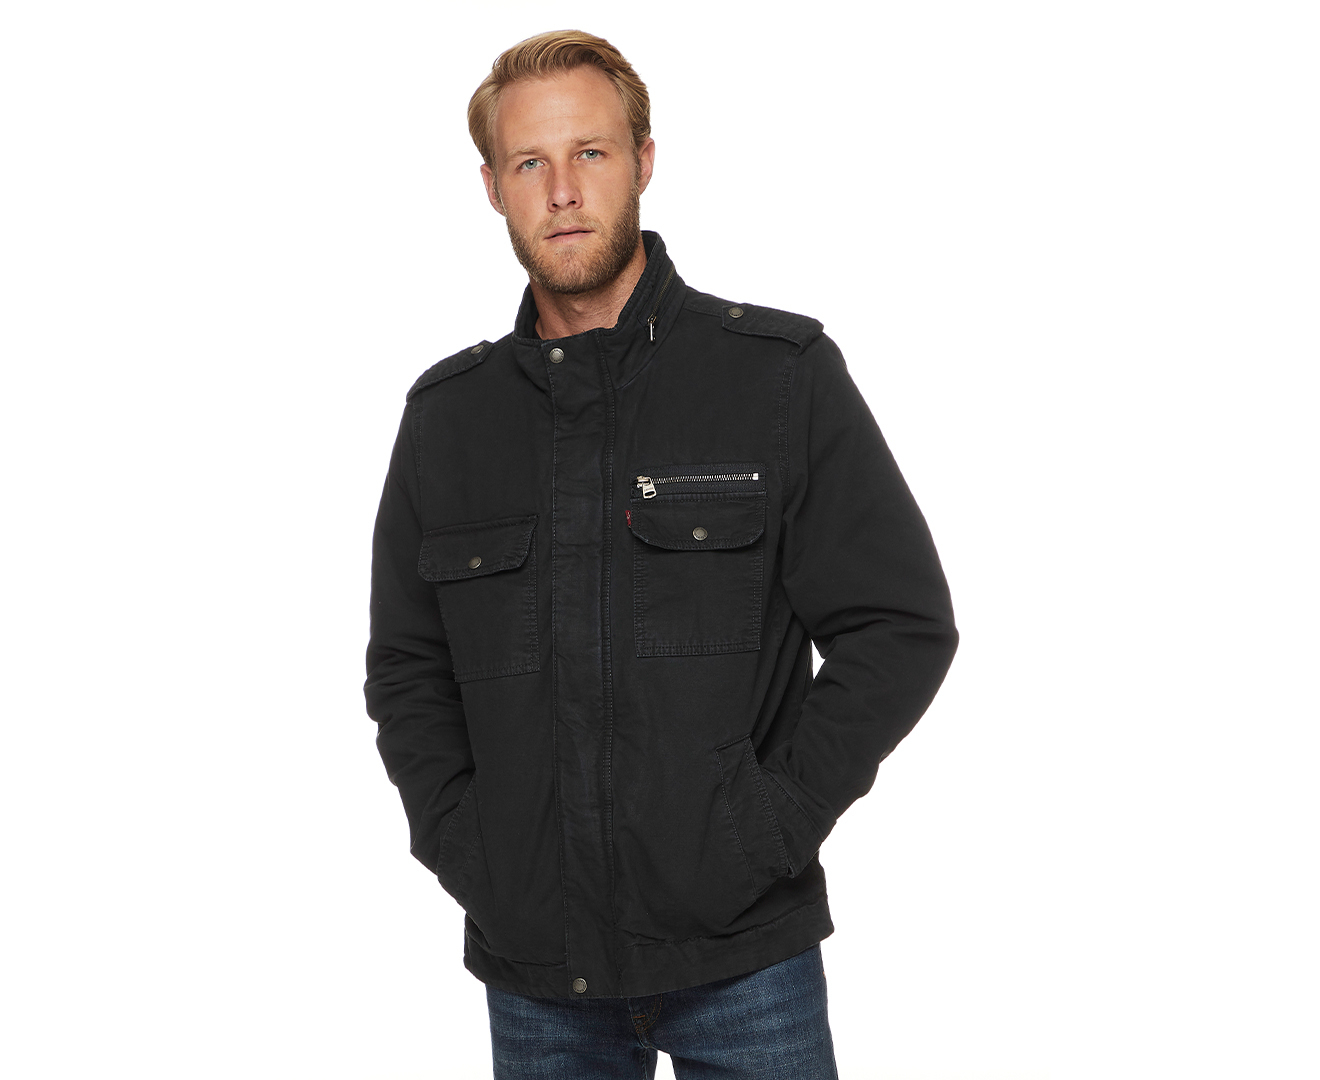 Levi's Men's Washed Cotton Military Jacket - Navy 